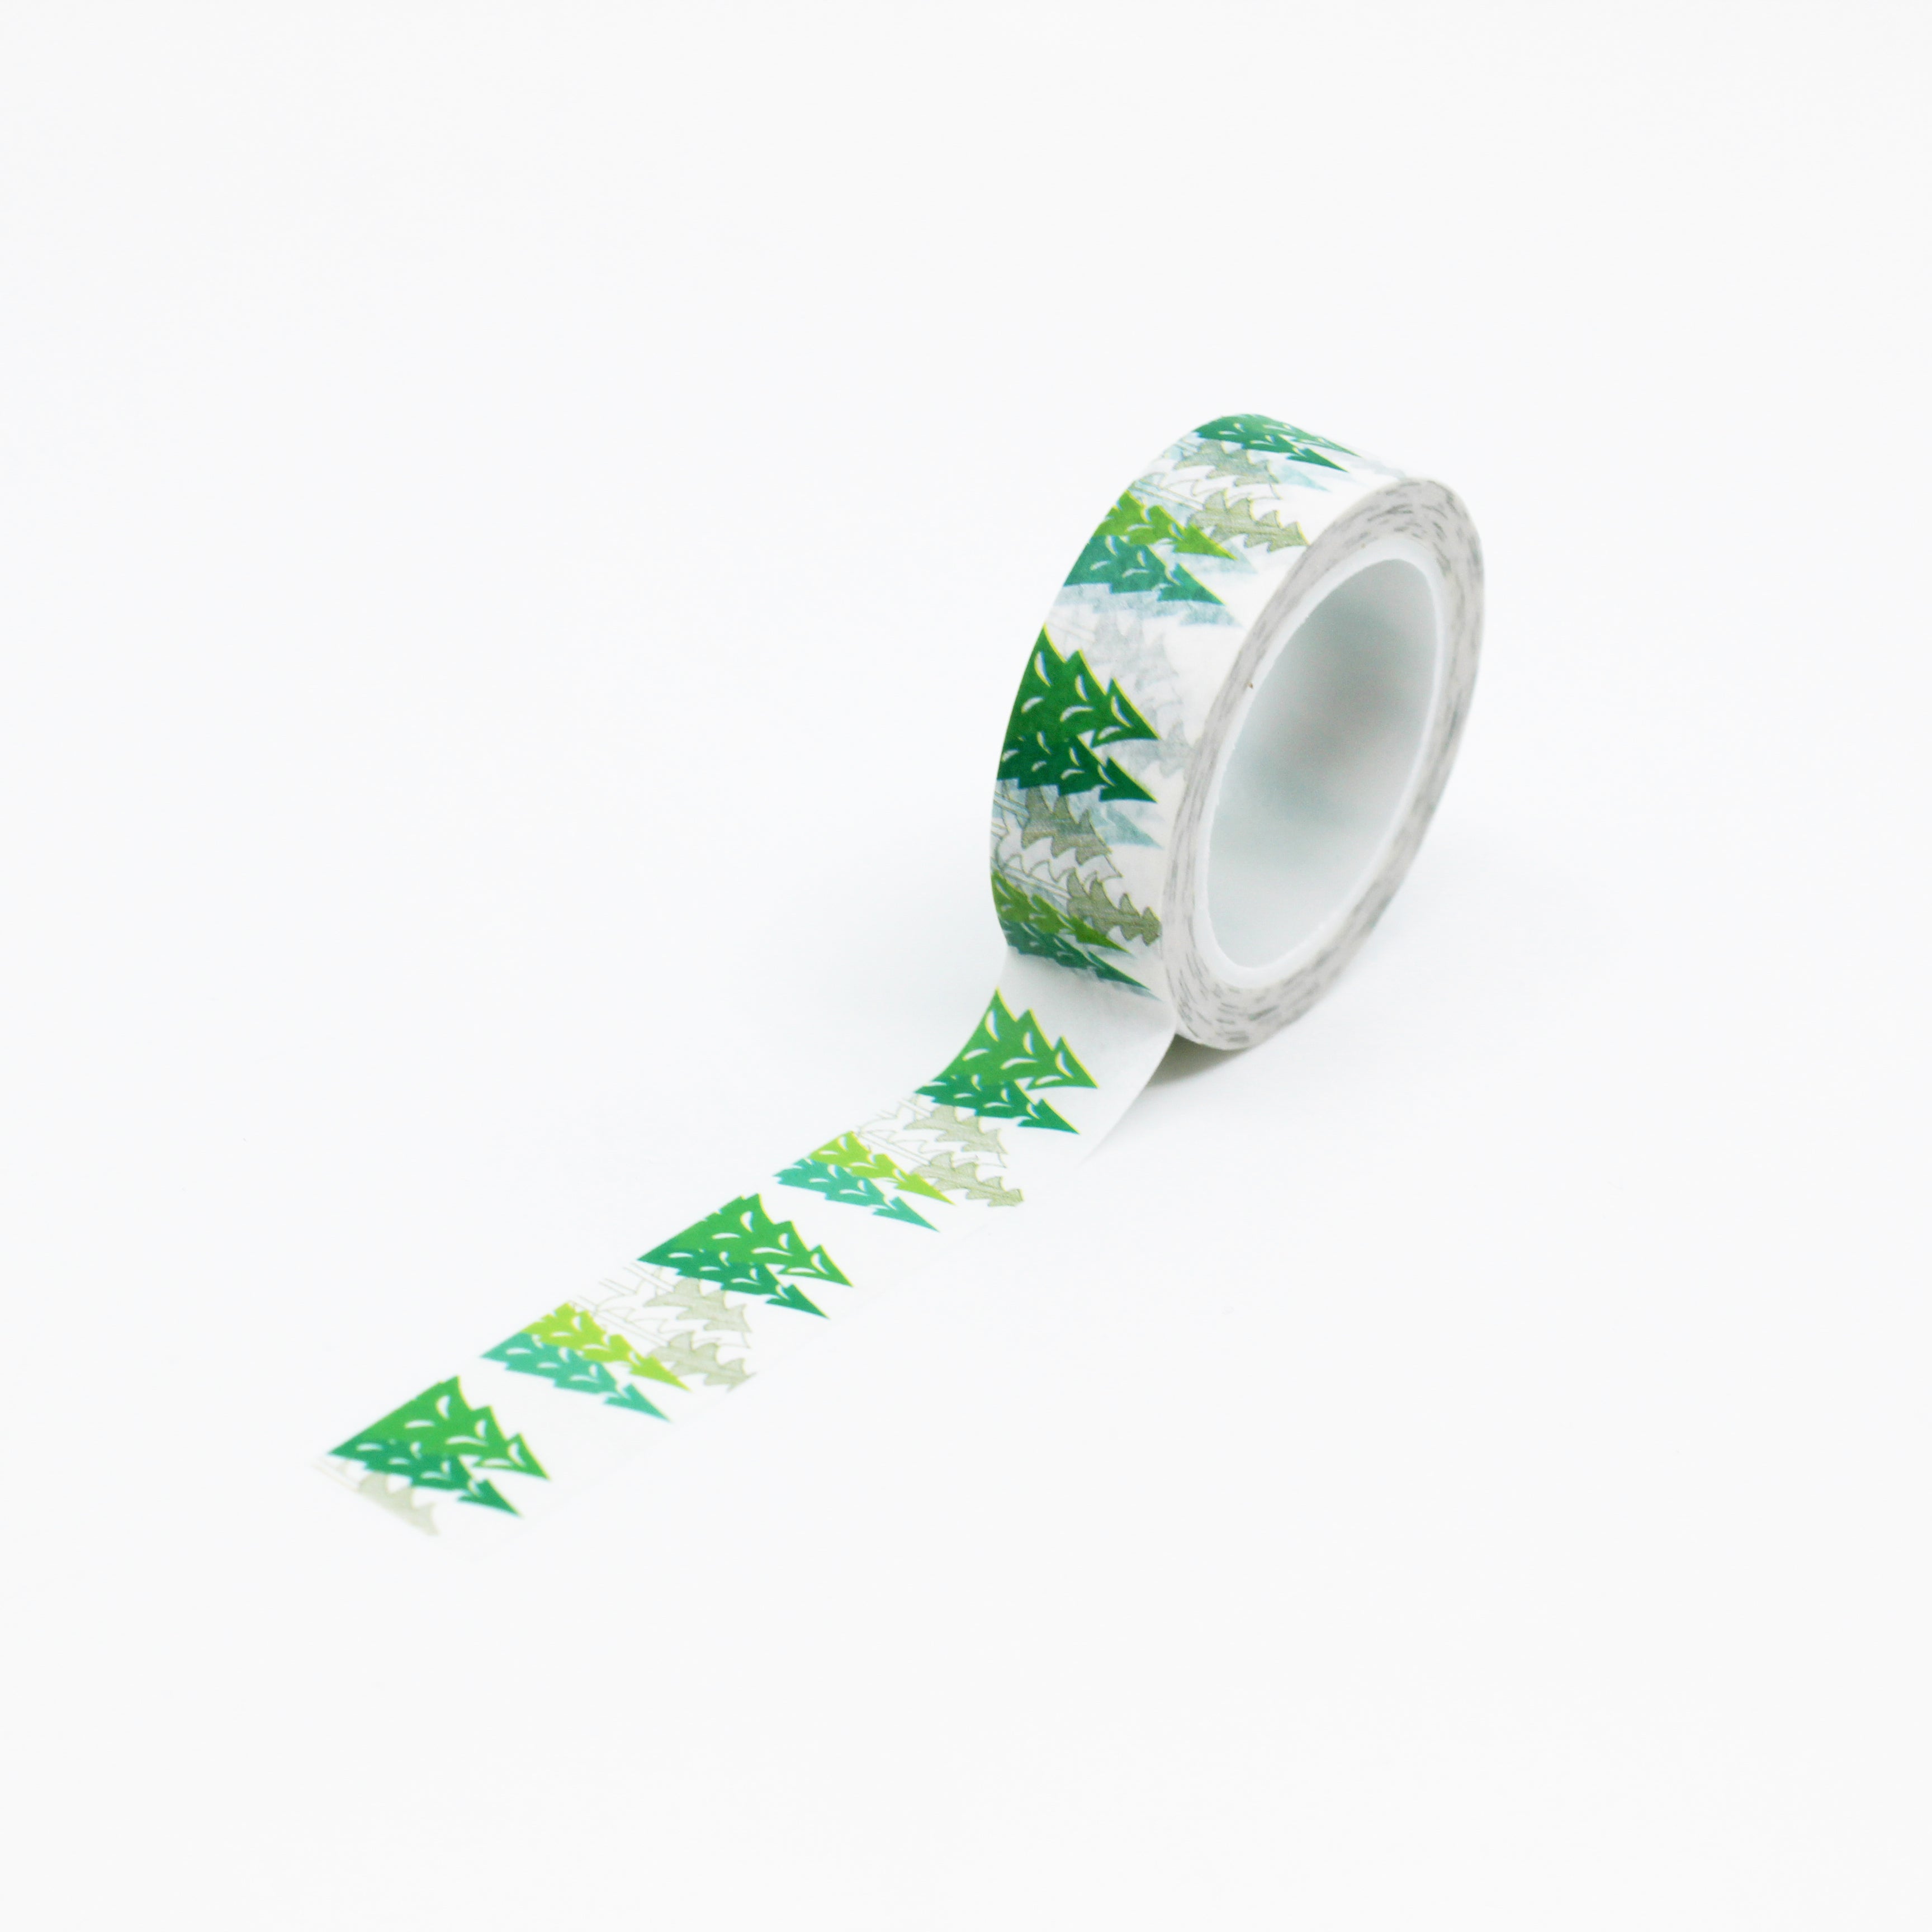 This is a full pattern repeat view of green Christmas tree washi tape from BBB Supplies Craft Shop